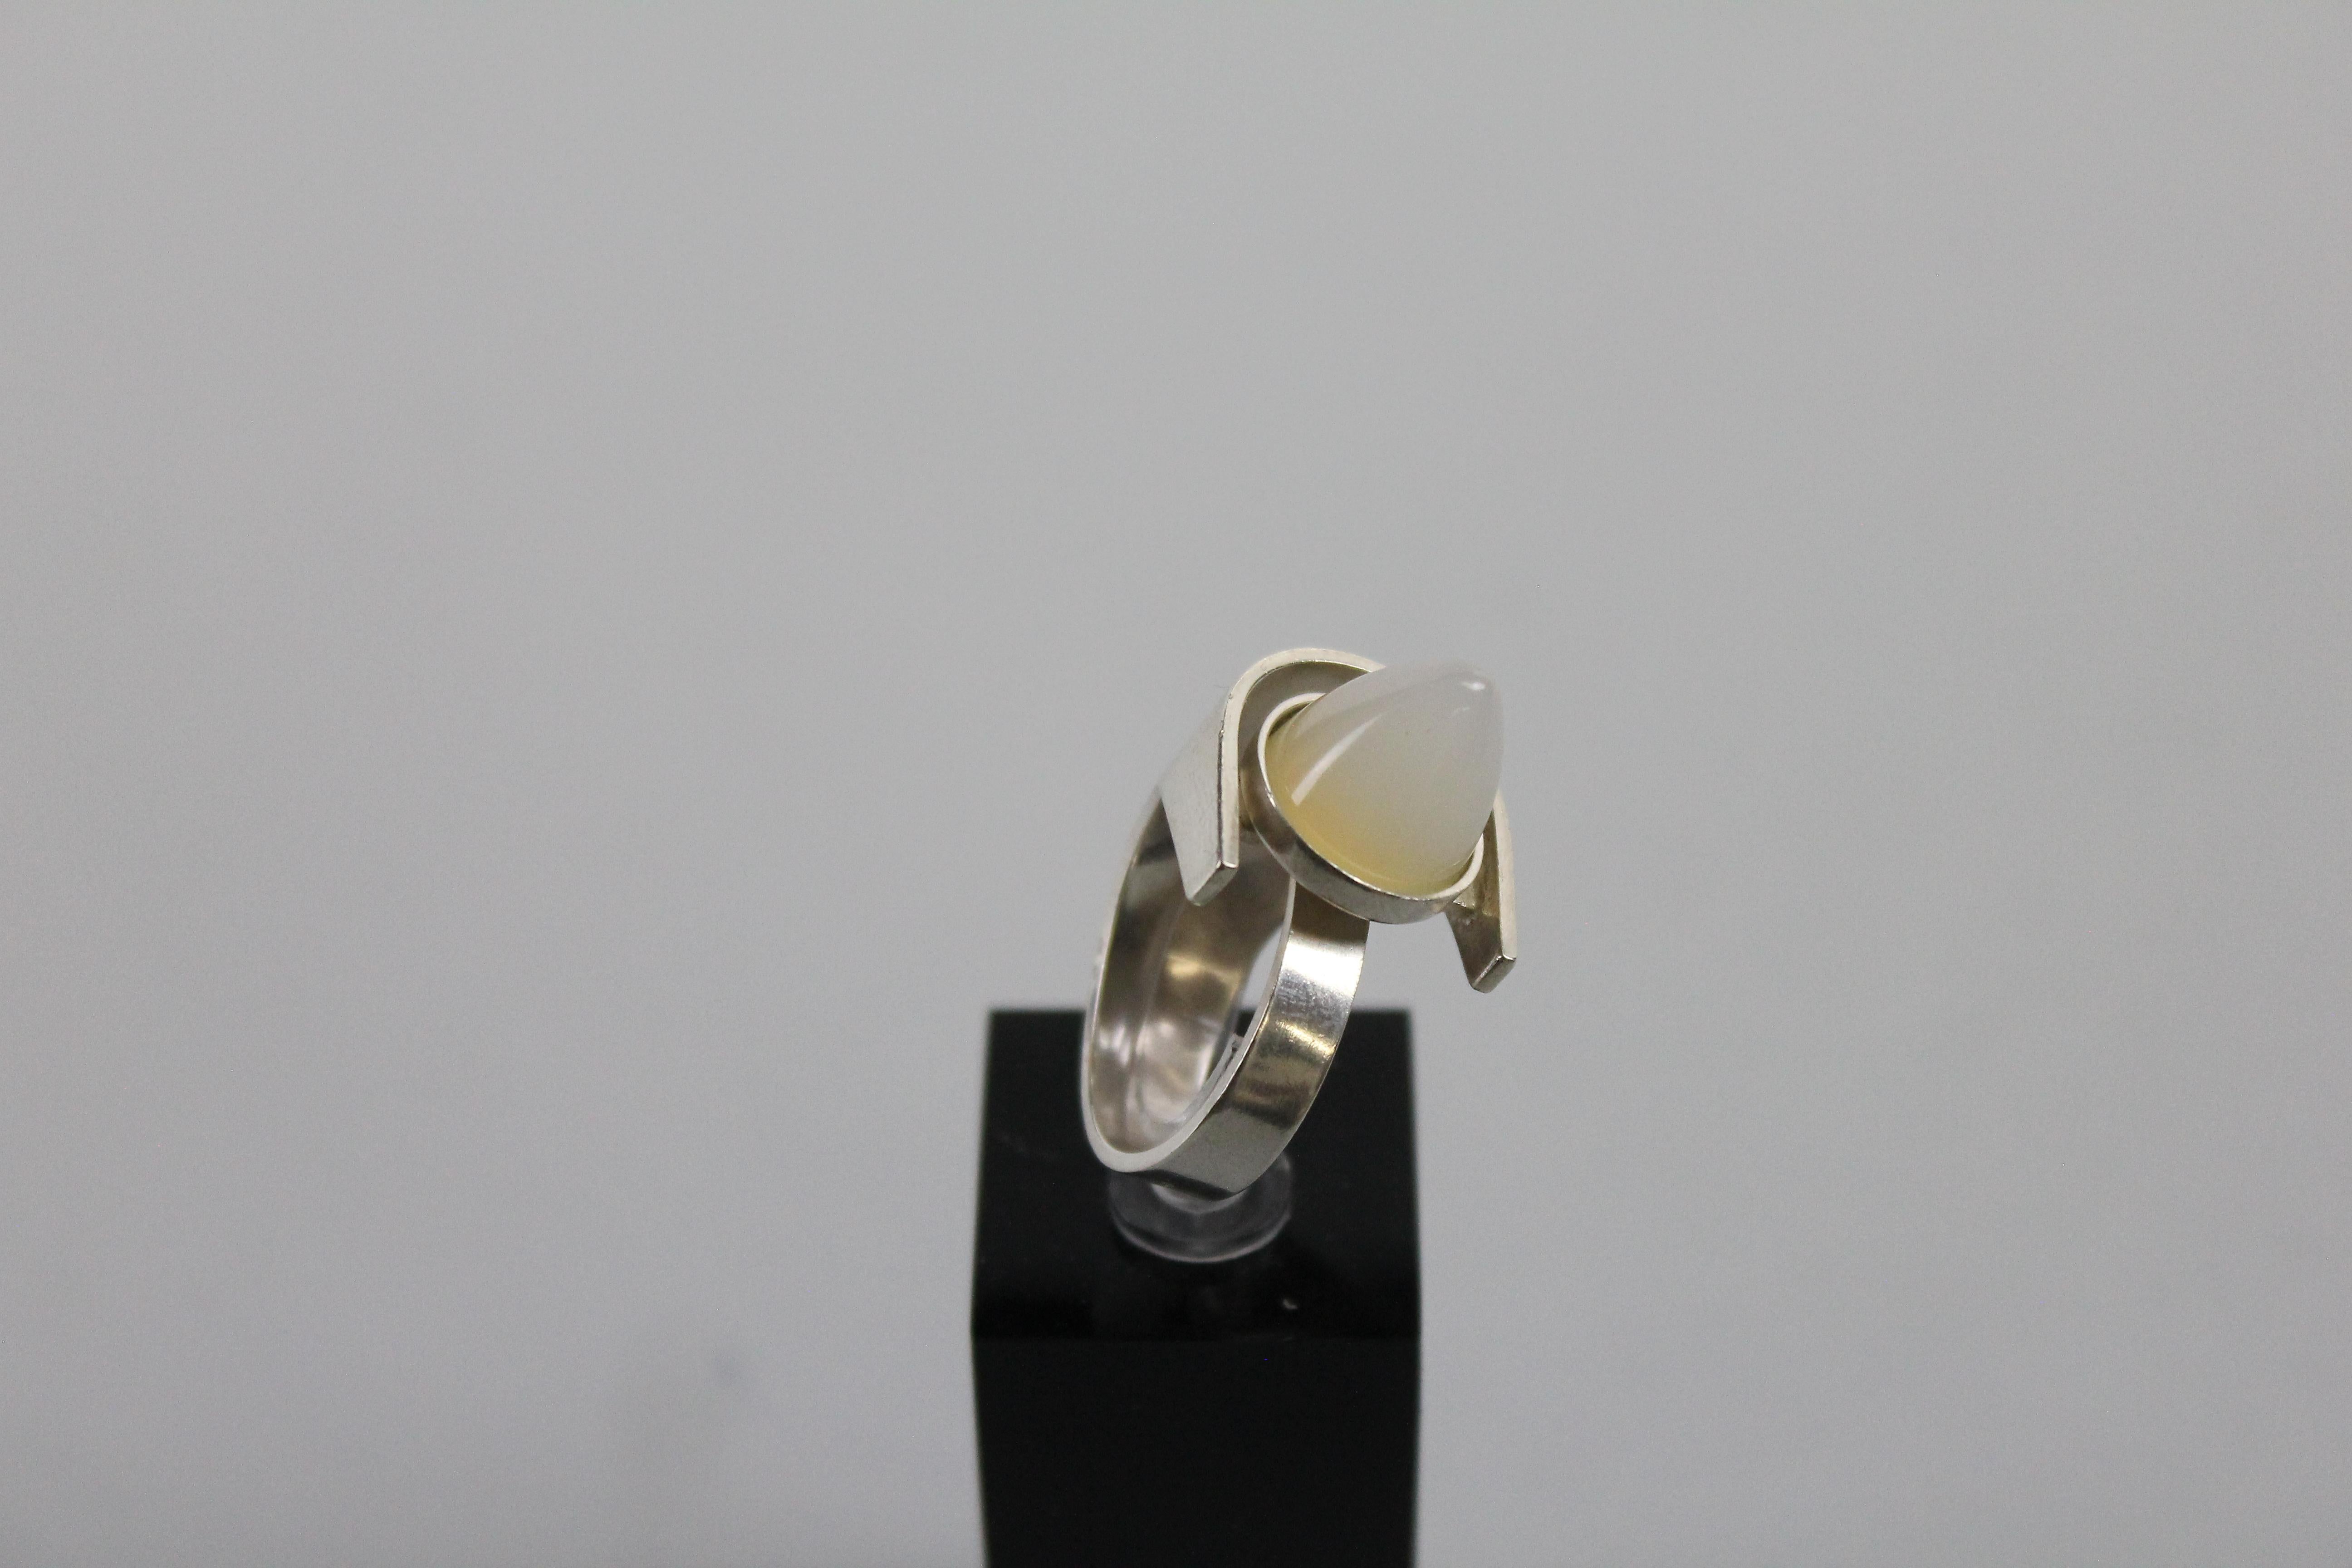 Elis Kauppi Scandinavian modernist ring for Kupittaan Kulta, Finland 1960s.
Sterling silver with a high cabochon cut moonstone.
The ring size is adjustable.